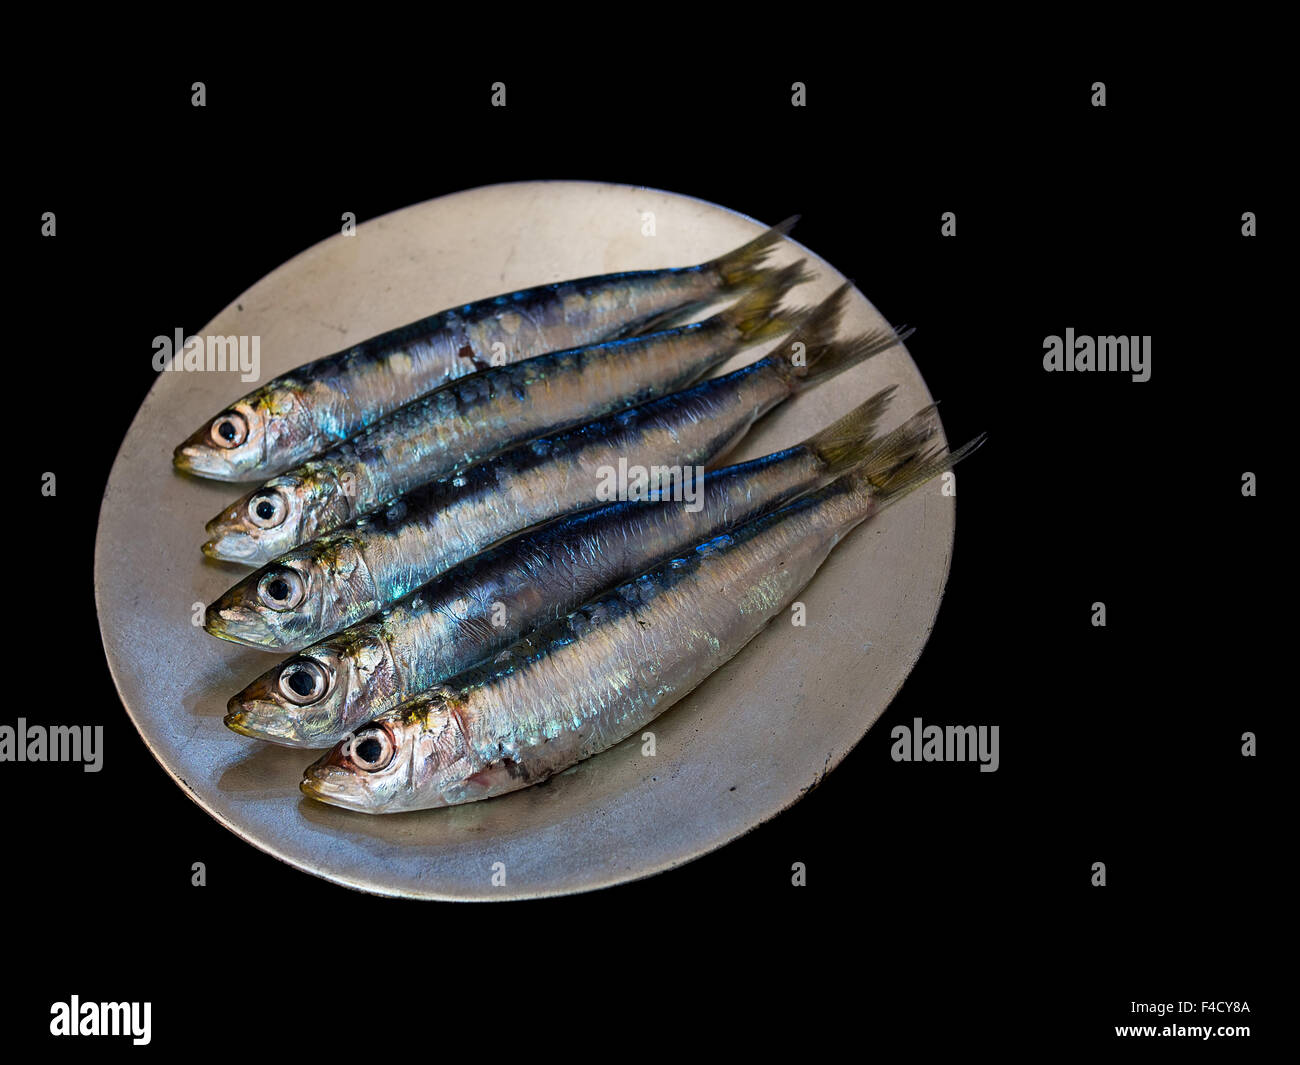 Healthy oily fish aka pilchards. Isolated on black. Harsh lighting for effect. Stock Photo